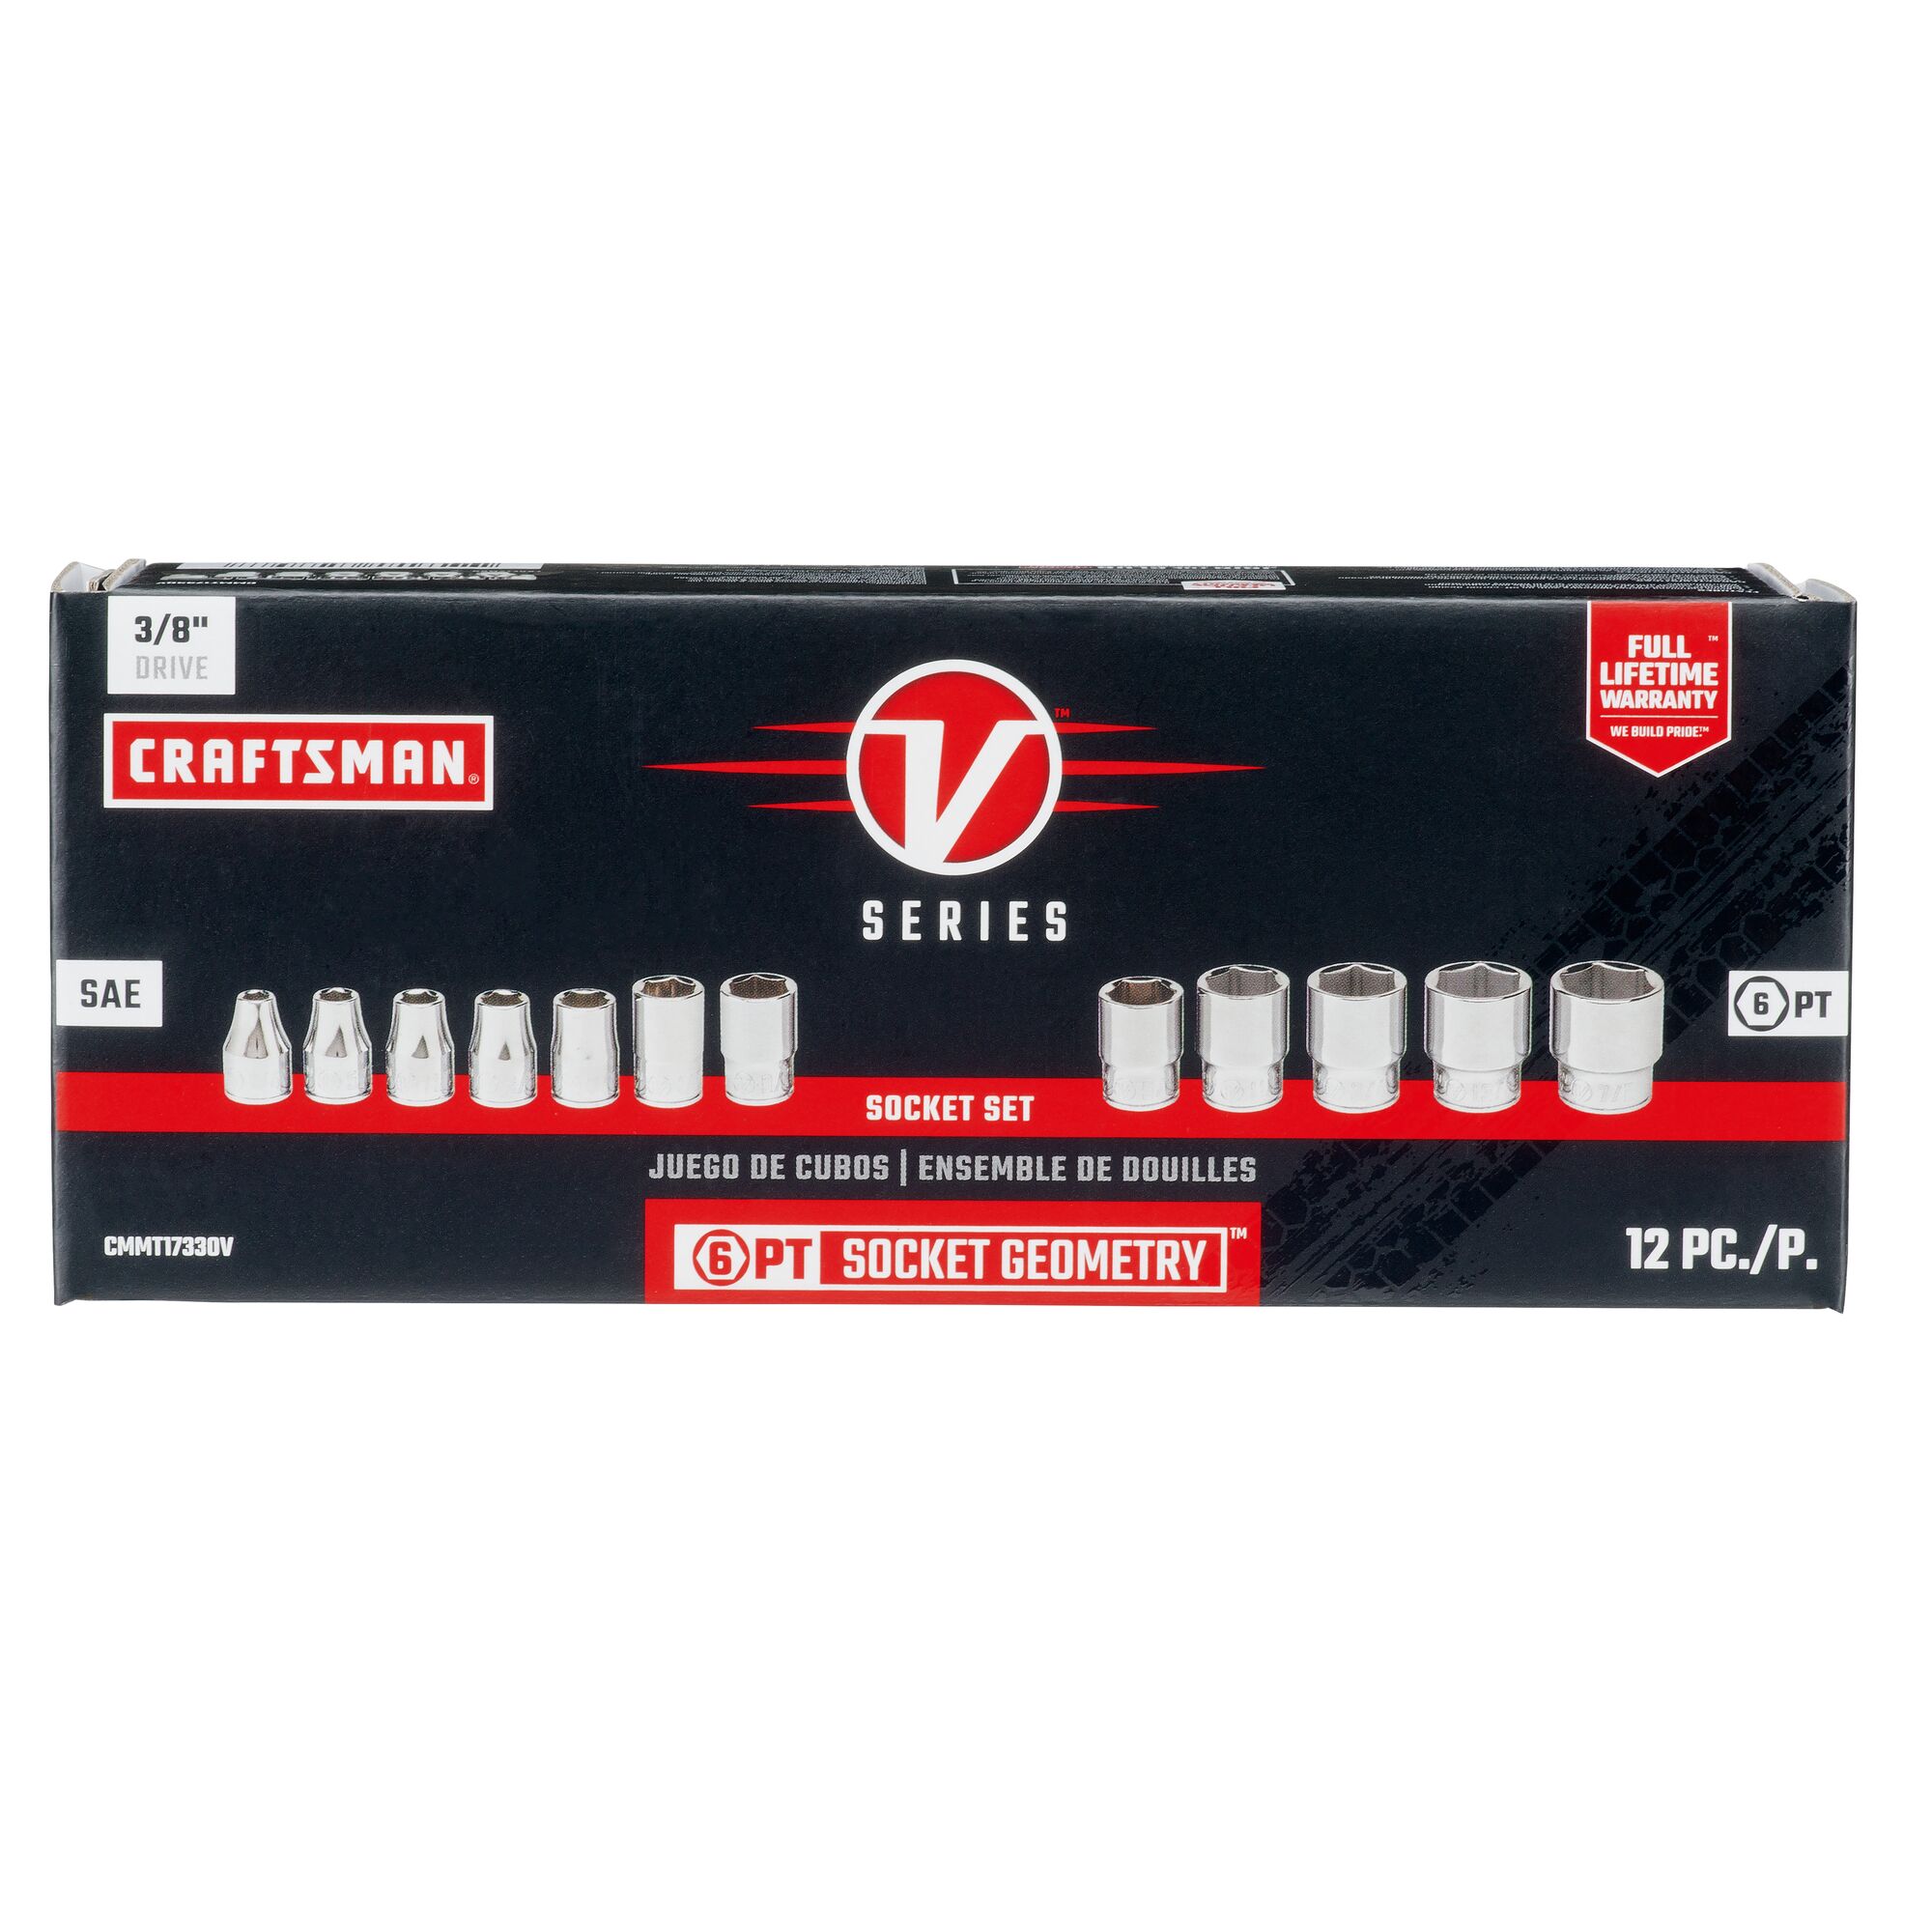 3 eighths inch drive S A E 6 point socket set 12 piece in cardboard packaging.